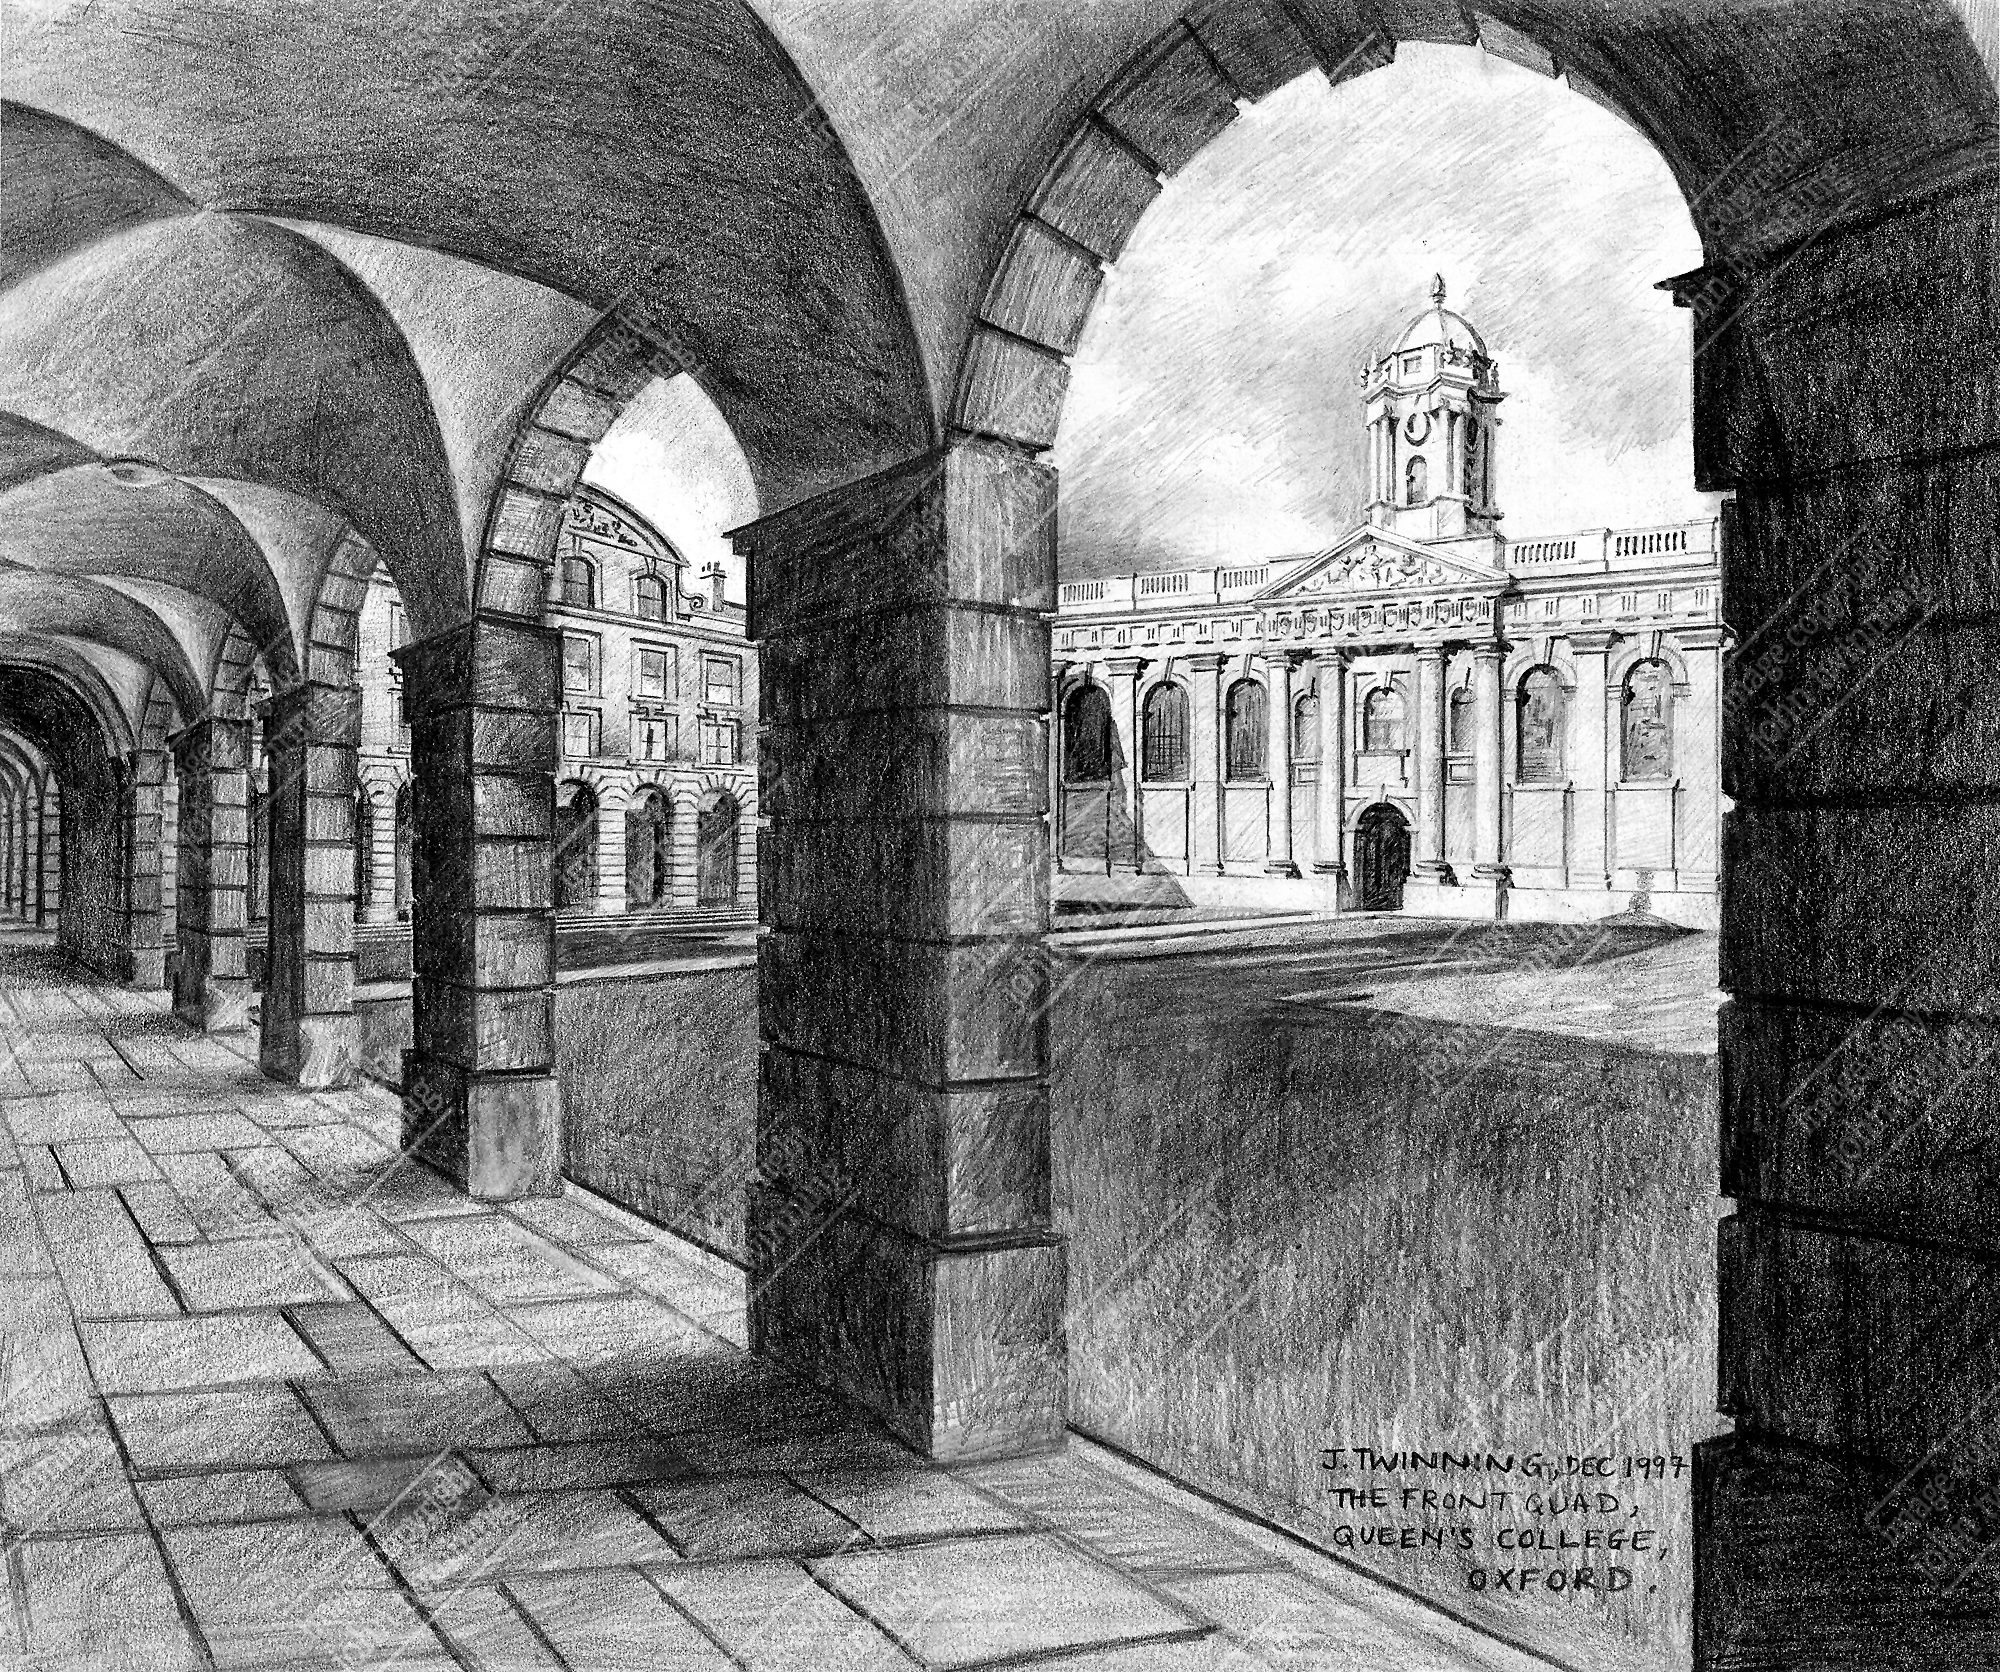 'The Front Quad' - art print from a pencil drawing of this view within the grounds of the queen's college, oxford